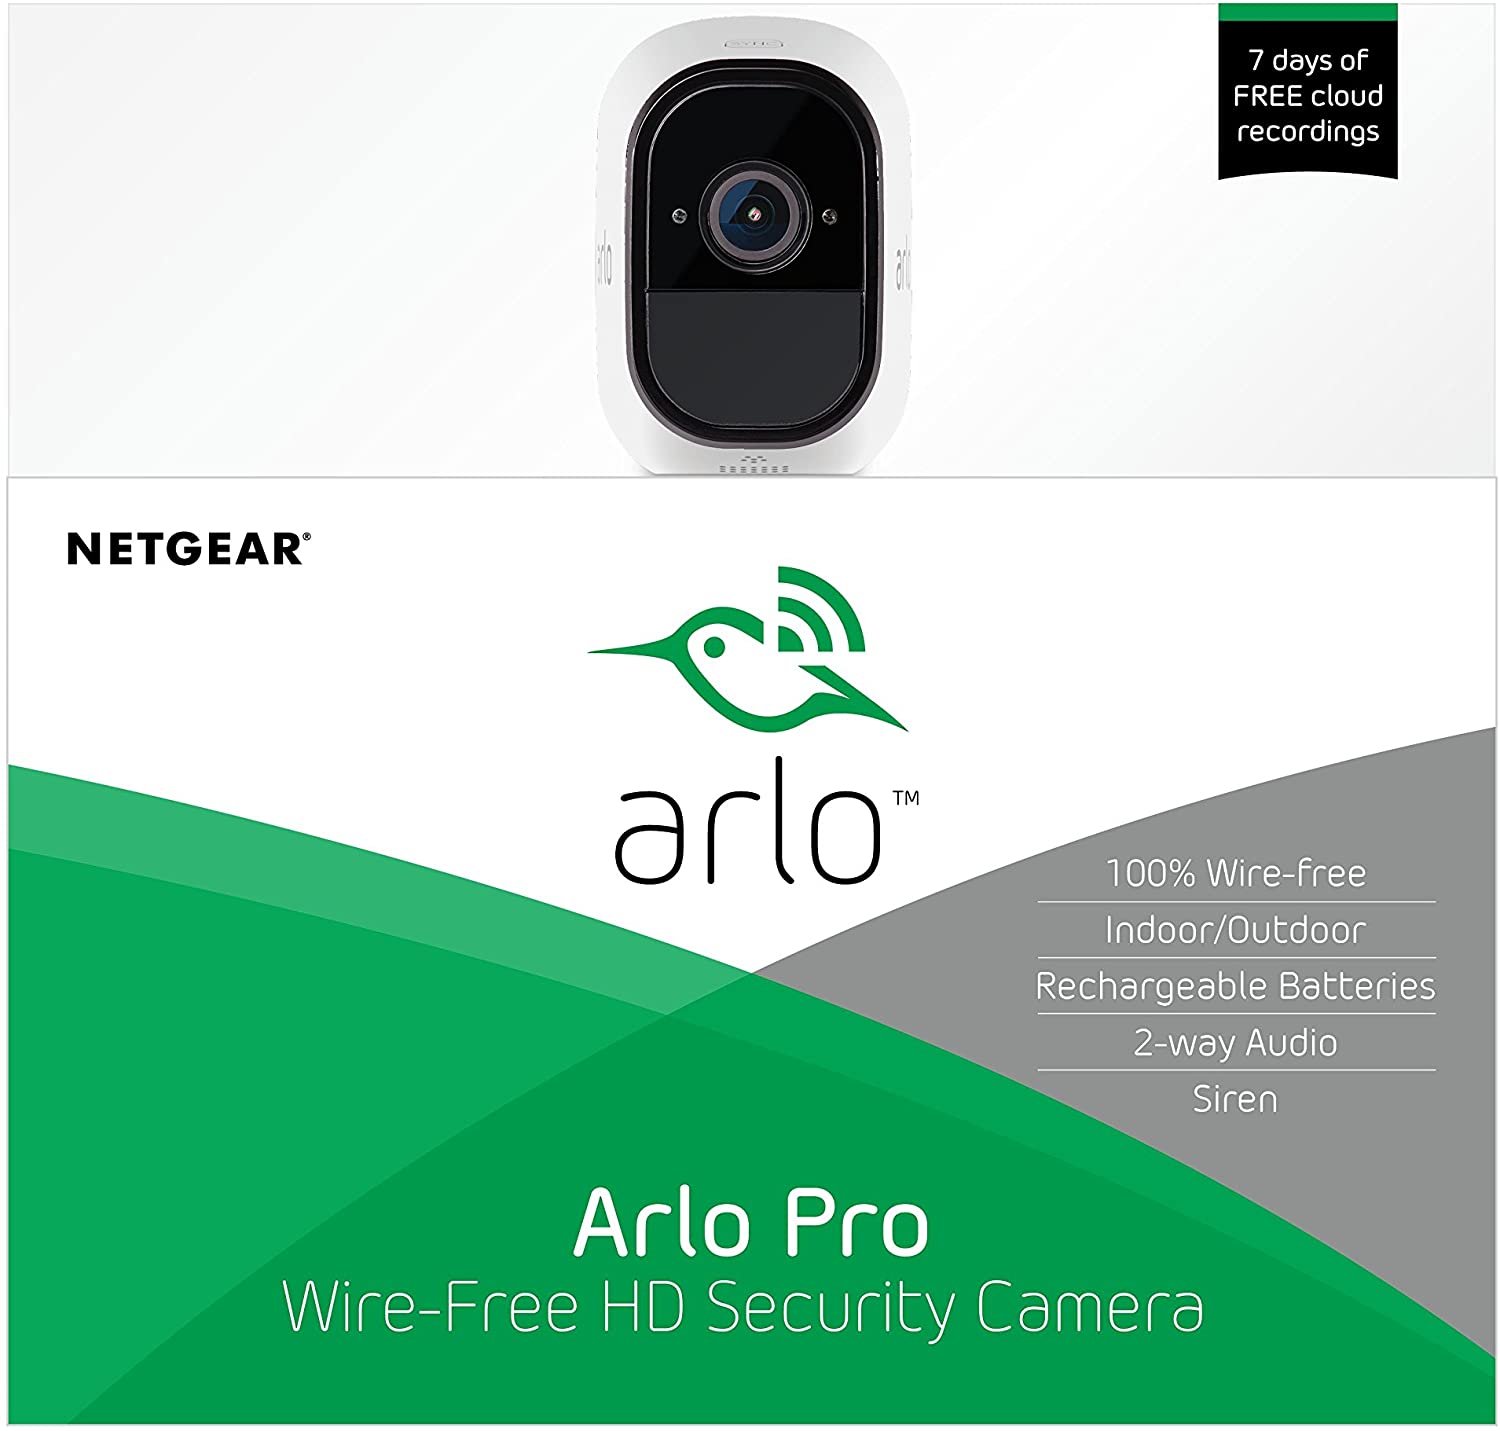 Arlo Pro VMS4430 Smart Security System VMS4430-100AUS